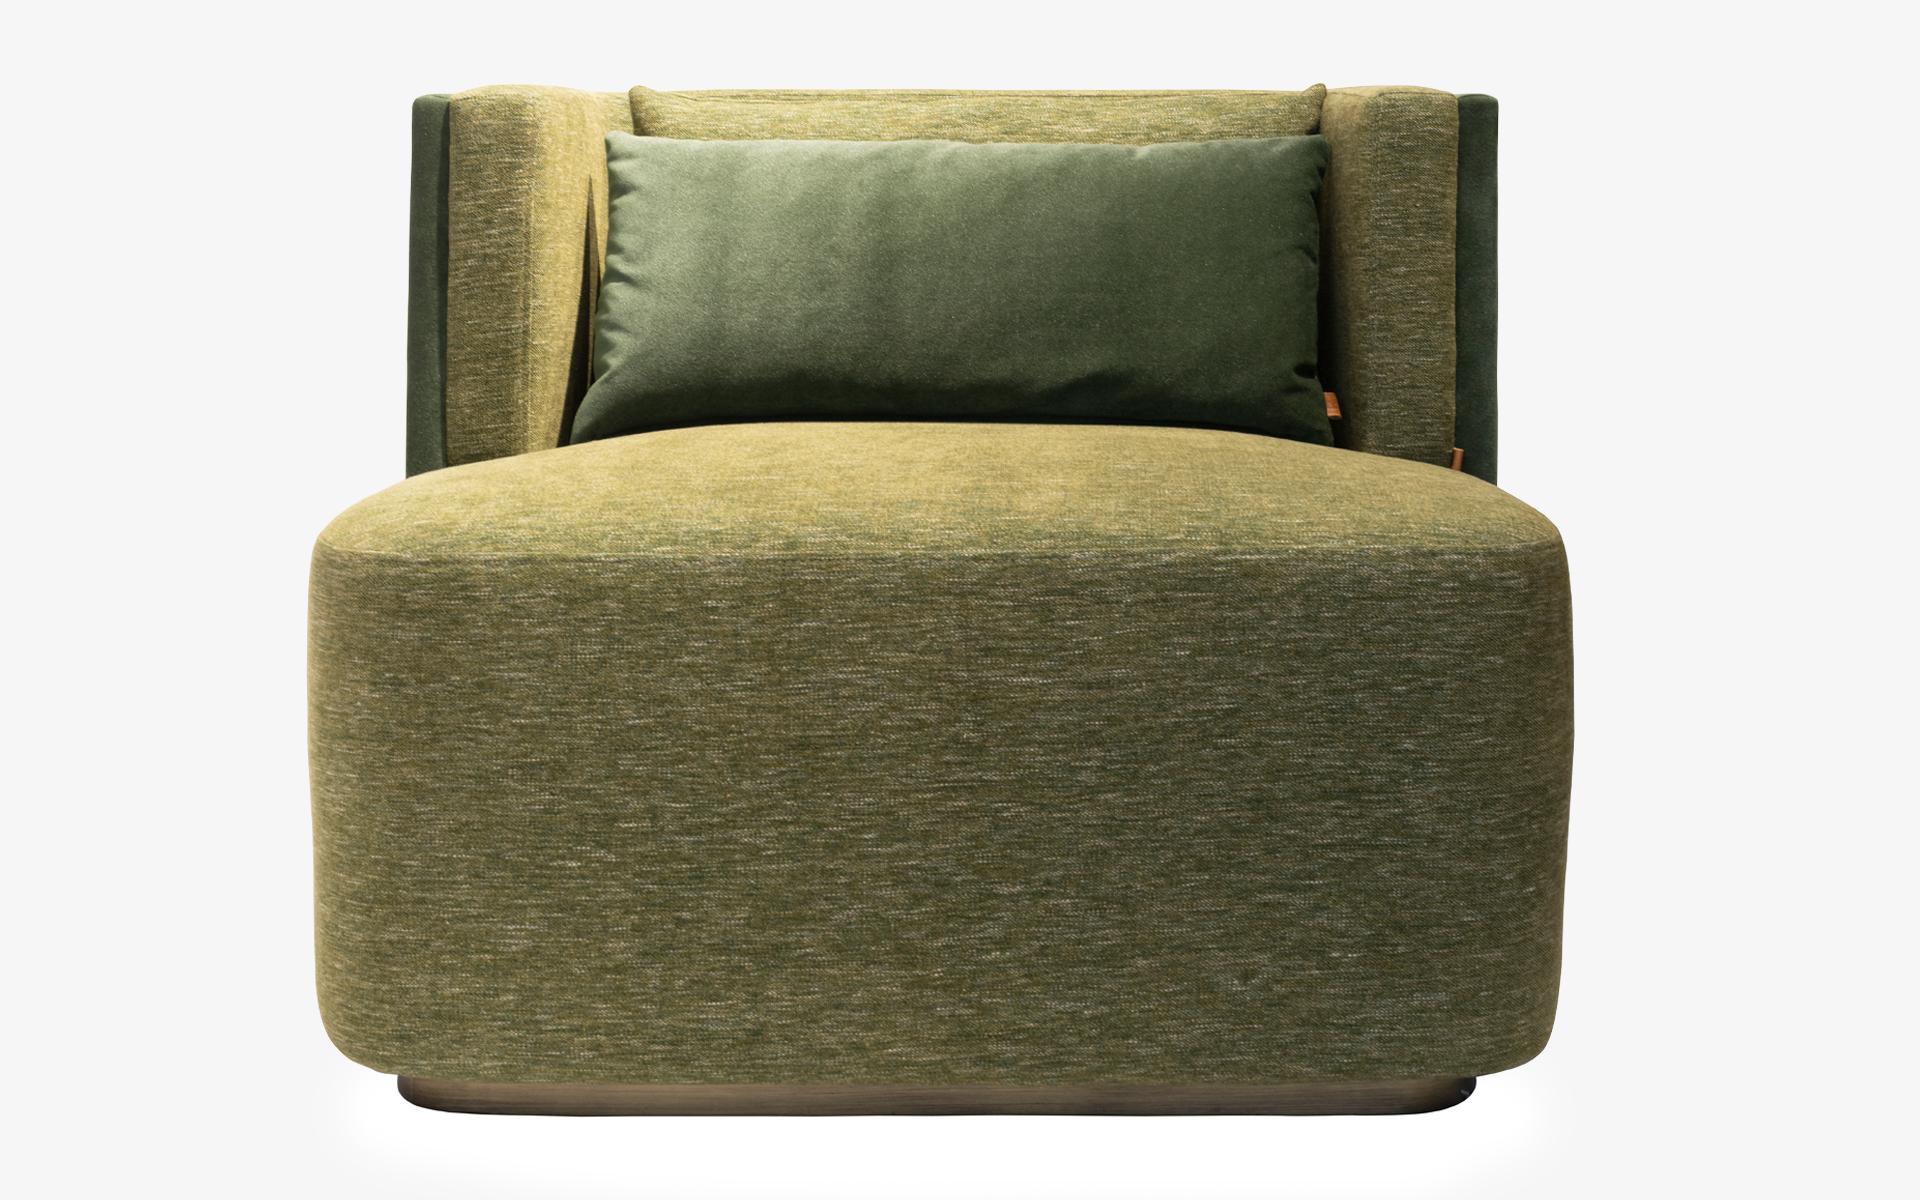 The papillonne green armchair complements your style with its flawless form and unmatched comfort, adding a unique character to your space...
Mustard bouclet and suede fabrics are used in this armchair.
You can combine different fabrics for back